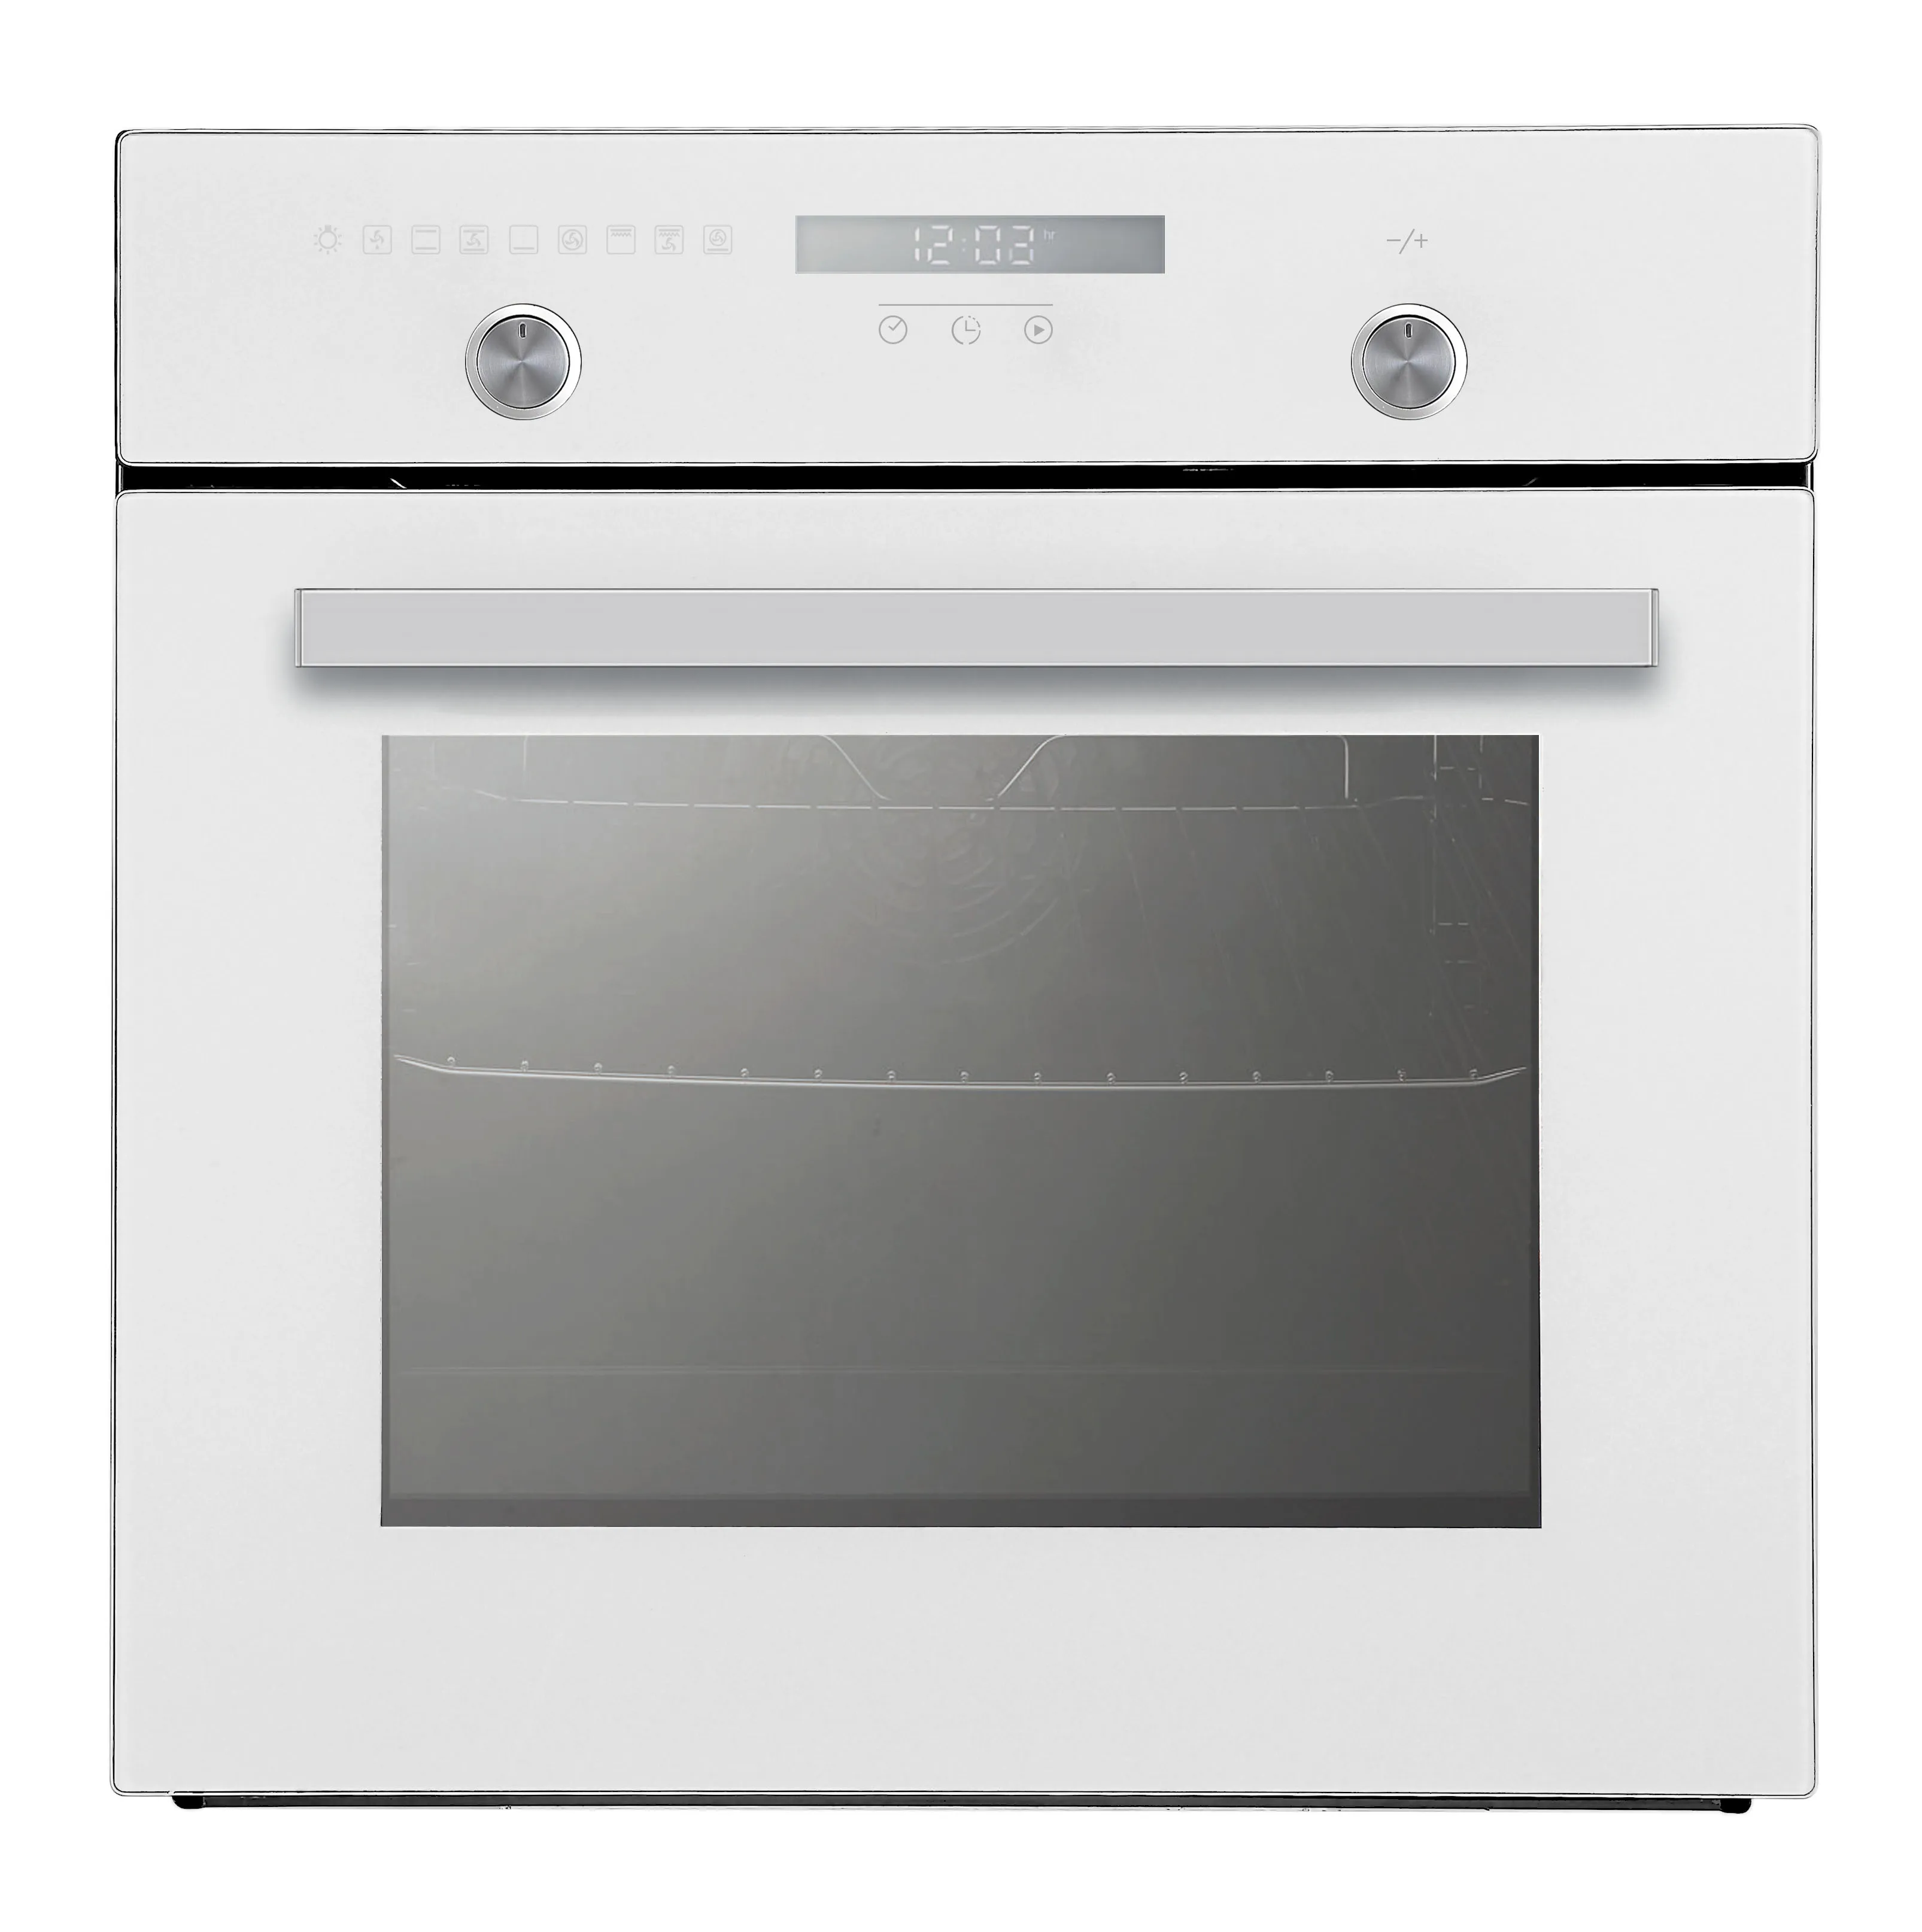 Electric ovens with steam фото 91